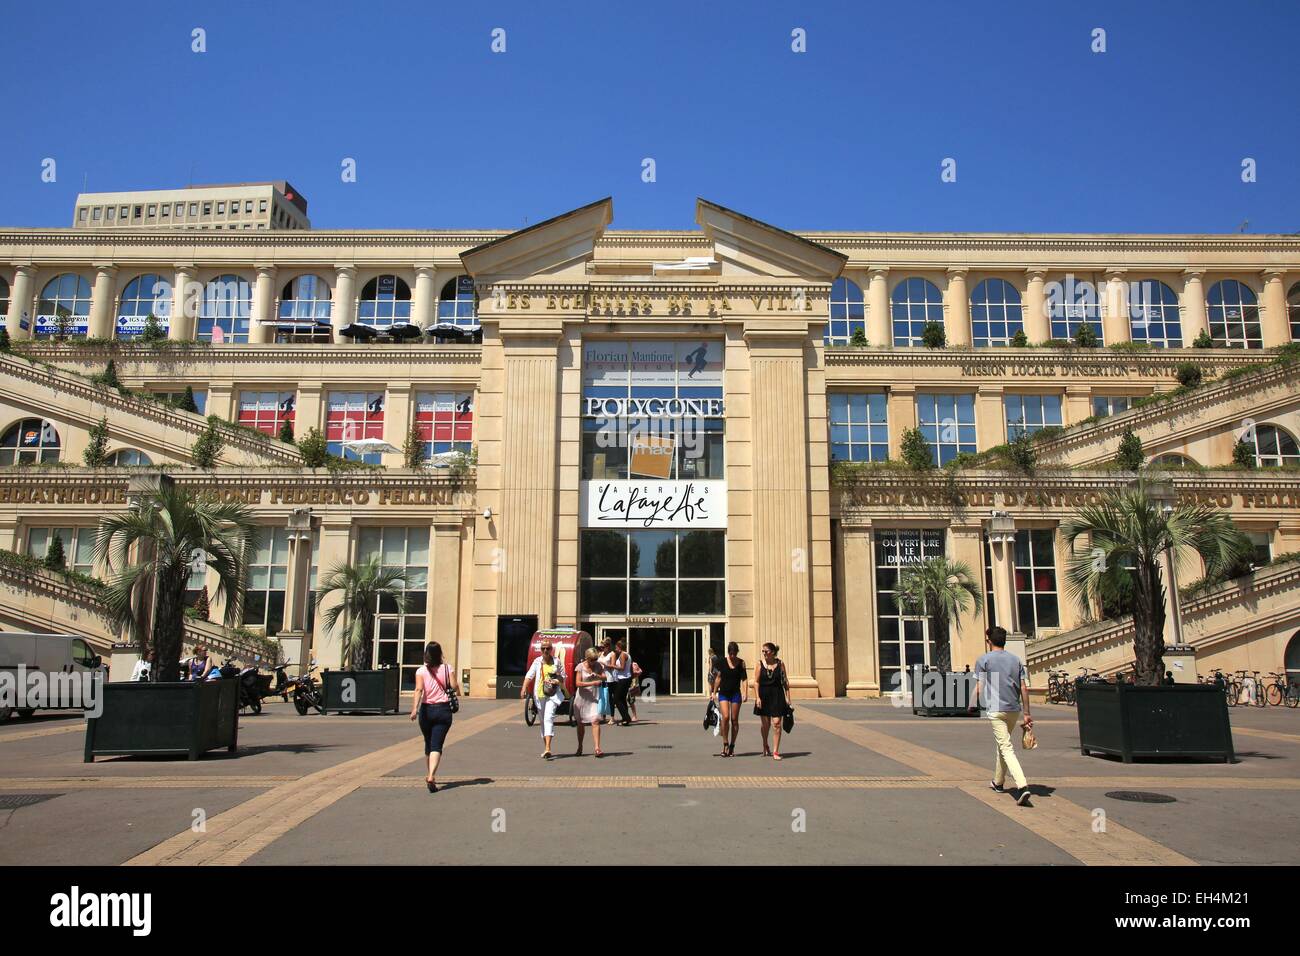 France Languedoc Roussillon Montpellier Sign High Resolution Stock  Photography and Images - Alamy